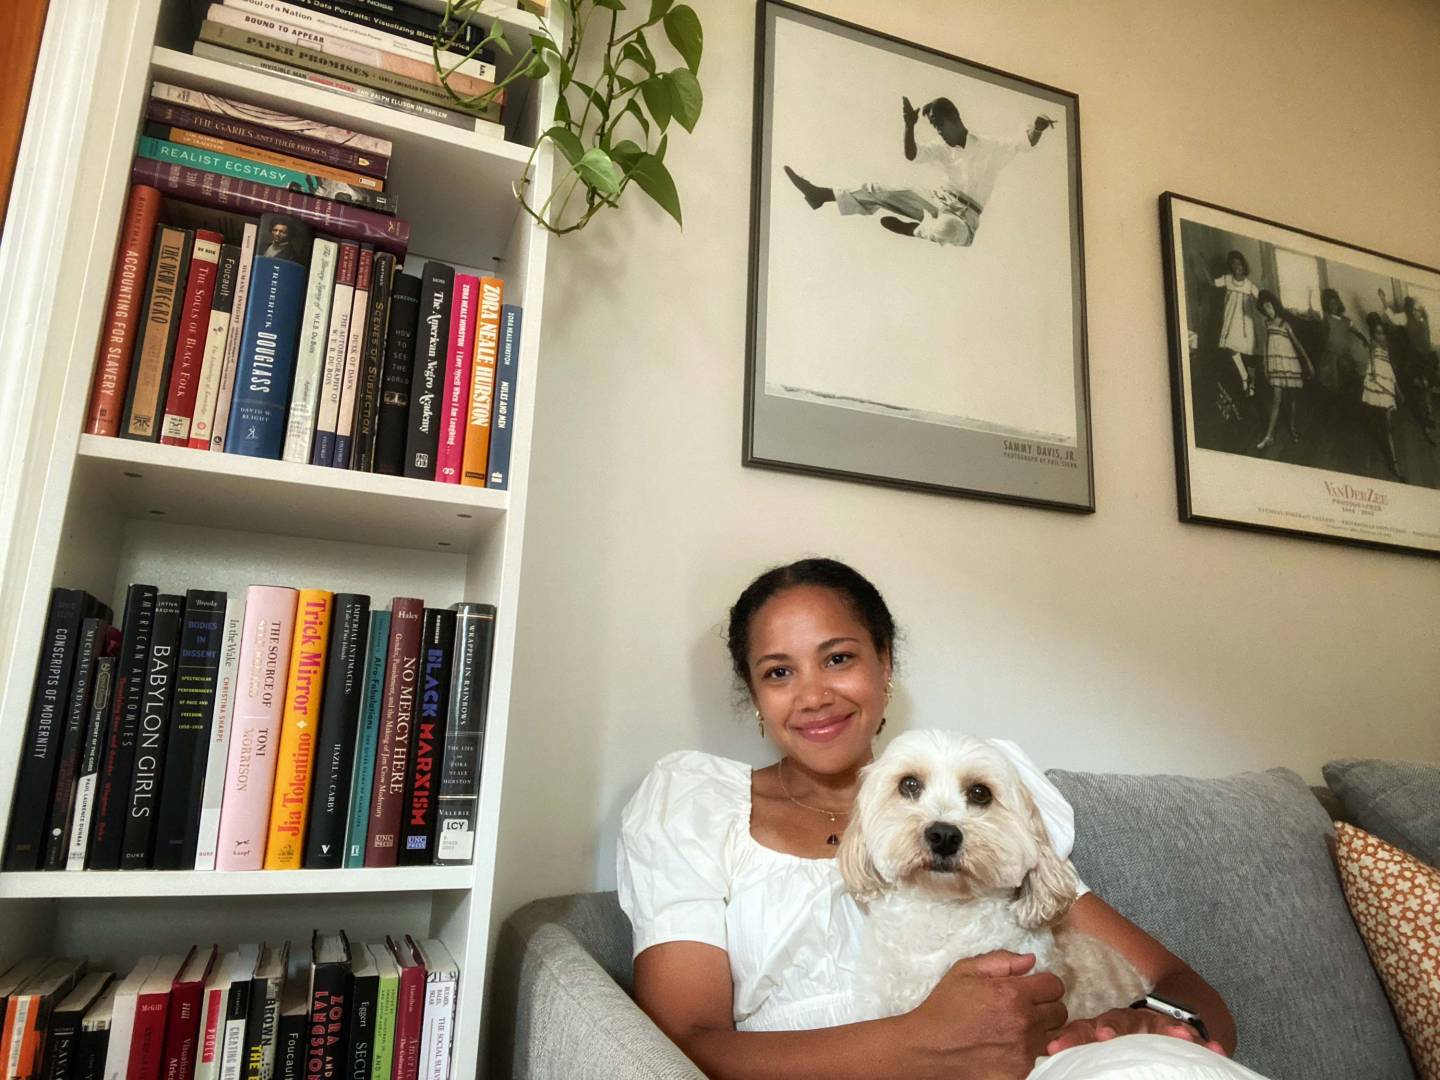 Autumn Womack with her dog next to bookshelves